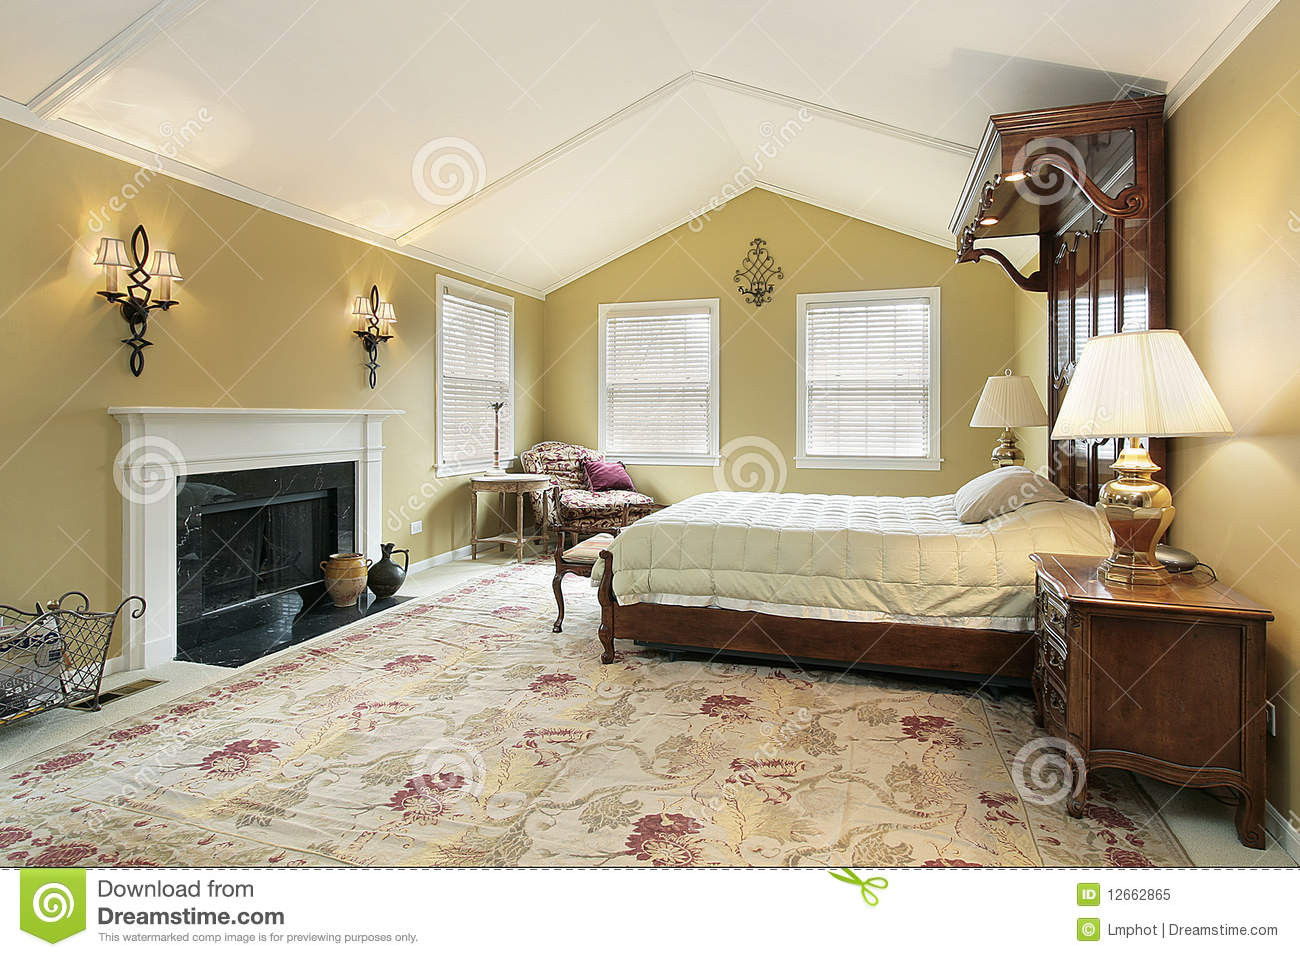 Gold Bedroom Walls
 Master Bedroom With Gold Walls Stock Image Image of